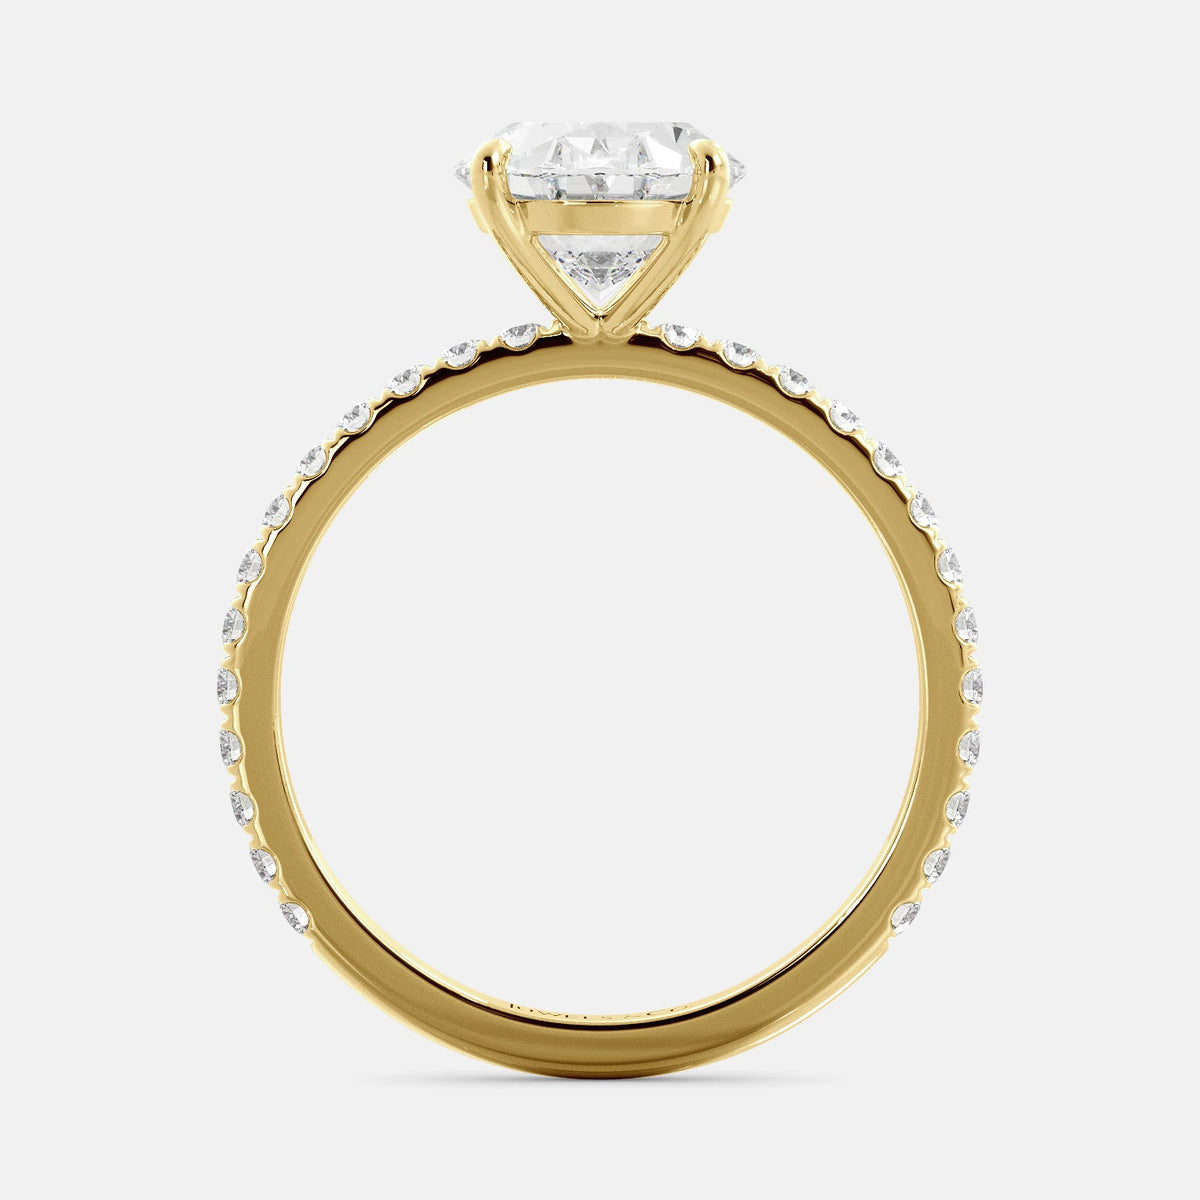 Lab-grown Oval Cut Diamond Ring with pave, 2 carat, yellow gold 14K